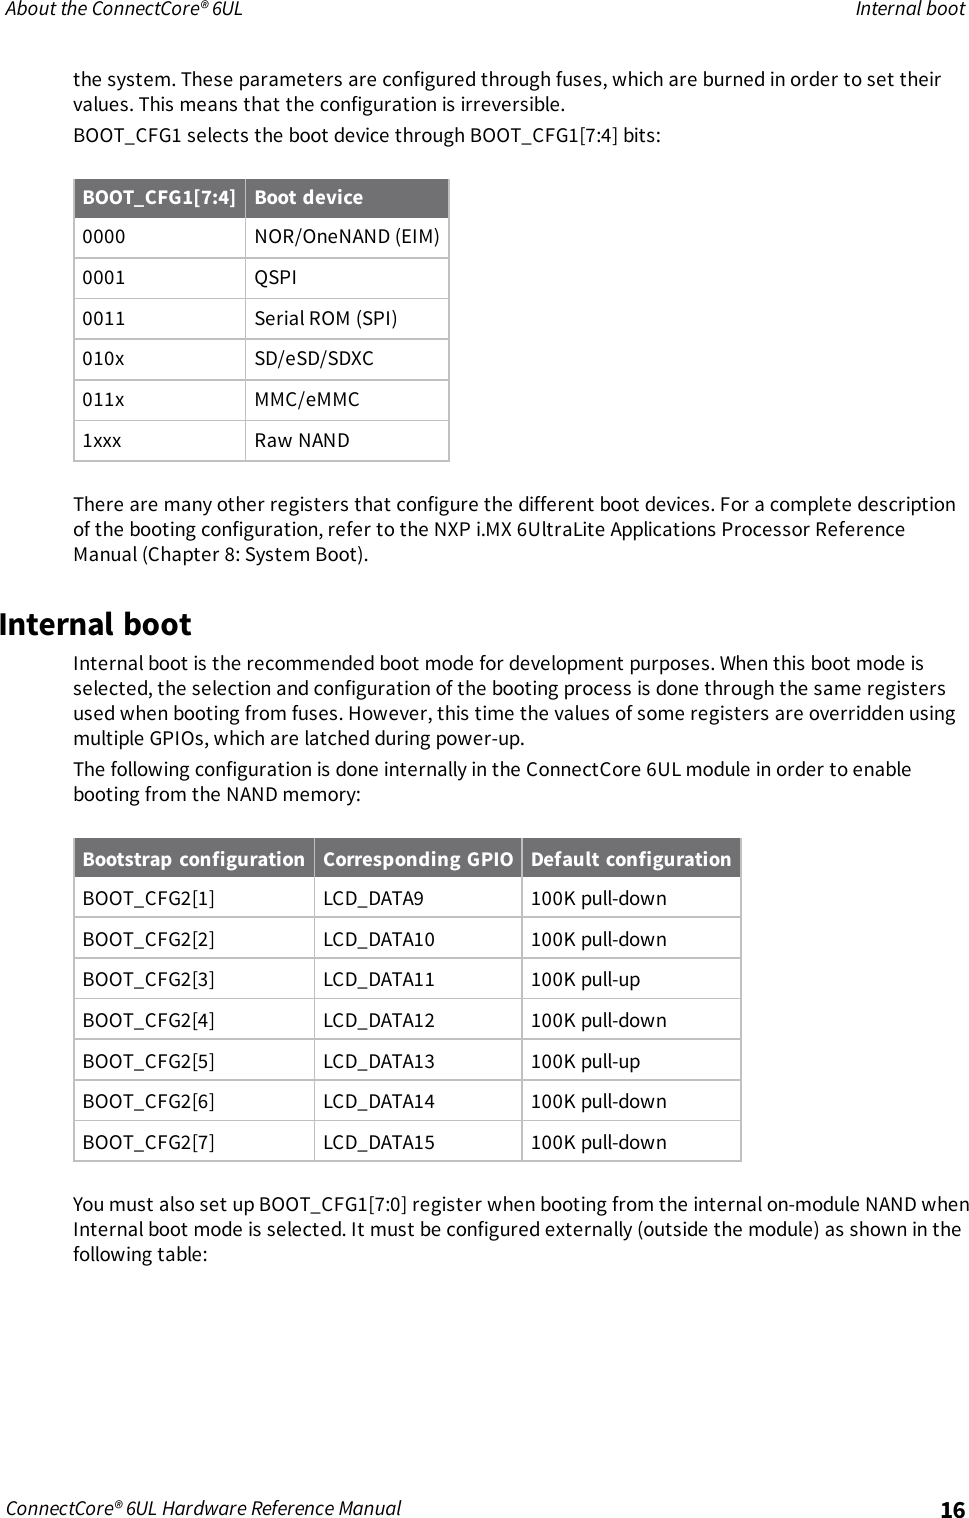 About the ConnectCore® 6UL Internal bootConnectCore® 6UL Hardware Reference Manual 16the system. These parameters are configured through fuses, which are burned in order to set theirvalues. This means that the configuration is irreversible.BOOT_CFG1 selects the boot device through BOOT_CFG1[7:4] bits:BOOT_CFG1[7:4] Boot device0000 NOR/OneNAND (EIM)0001 QSPI0011 Serial ROM (SPI)010x SD/eSD/SDXC011x MMC/eMMC1xxx Raw NANDThere are many other registers that configure the different boot devices. For a complete descriptionof the booting configuration, refer to the NXP i.MX 6UltraLite Applications Processor ReferenceManual (Chapter 8: System Boot).Internal bootInternal boot is the recommended boot mode for development purposes. When this boot mode isselected, the selection and configuration of the booting process is done through the same registersused when booting from fuses. However, this time the values of some registers are overridden usingmultiple GPIOs, which are latched during power-up.The following configuration is done internally in the ConnectCore 6UL module in order to enablebooting from the NAND memory:Bootstrap configuration Corresponding GPIO Default configurationBOOT_CFG2[1] LCD_DATA9 100K pull-downBOOT_CFG2[2] LCD_DATA10 100K pull-downBOOT_CFG2[3] LCD_DATA11 100K pull-upBOOT_CFG2[4] LCD_DATA12 100K pull-downBOOT_CFG2[5] LCD_DATA13 100K pull-upBOOT_CFG2[6] LCD_DATA14 100K pull-downBOOT_CFG2[7] LCD_DATA15 100K pull-downYou must also set up BOOT_CFG1[7:0] register when booting from the internal on-module NAND whenInternal boot mode is selected. It must be configured externally (outside the module) as shown in thefollowing table: